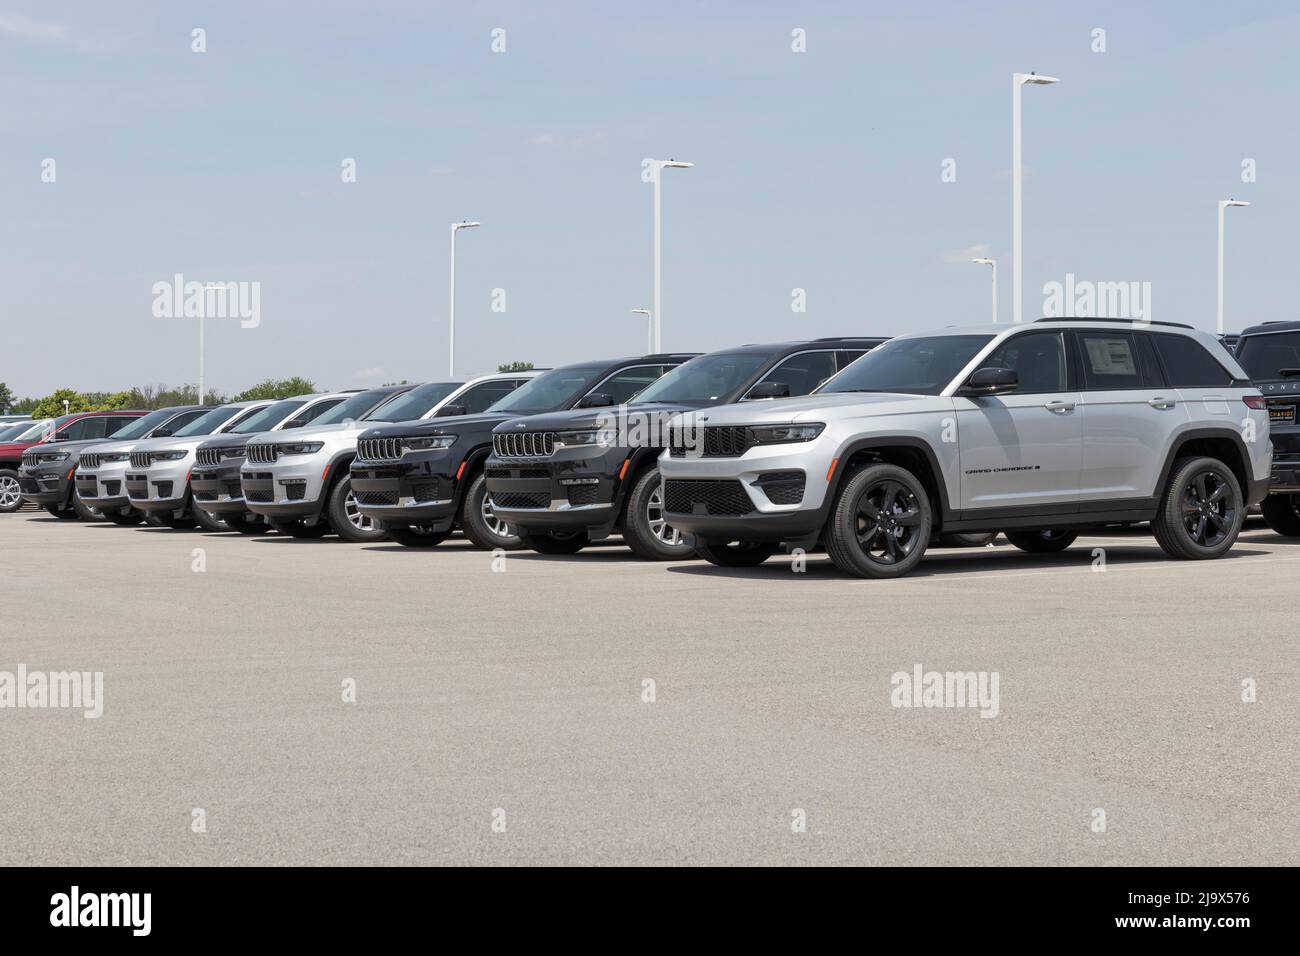 Lafayette - Circa May 2022: Jeep Grand Cherokee display at a Stellantis dealership. Jeep offers the Grand Cherokee in Laredo, Trailhawk and Overland m Stock Photo